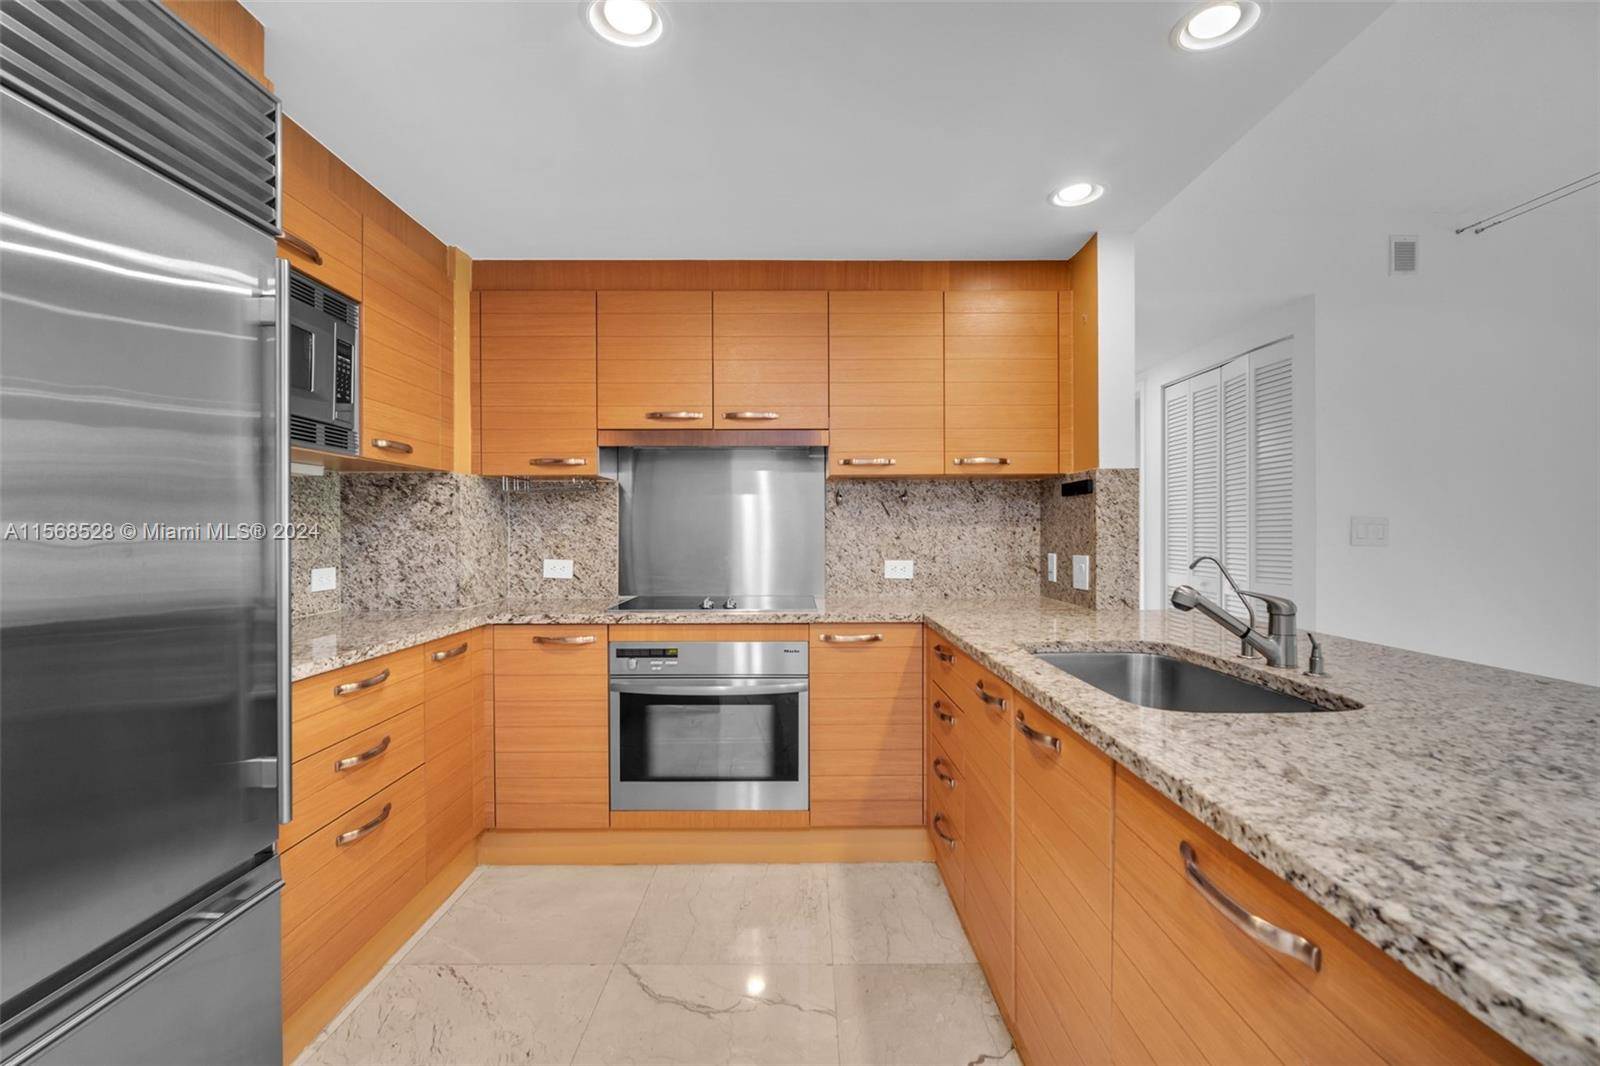 Very unique opportunity to live in one of the most desirable 2 bedroom condos in Coconut Grove !